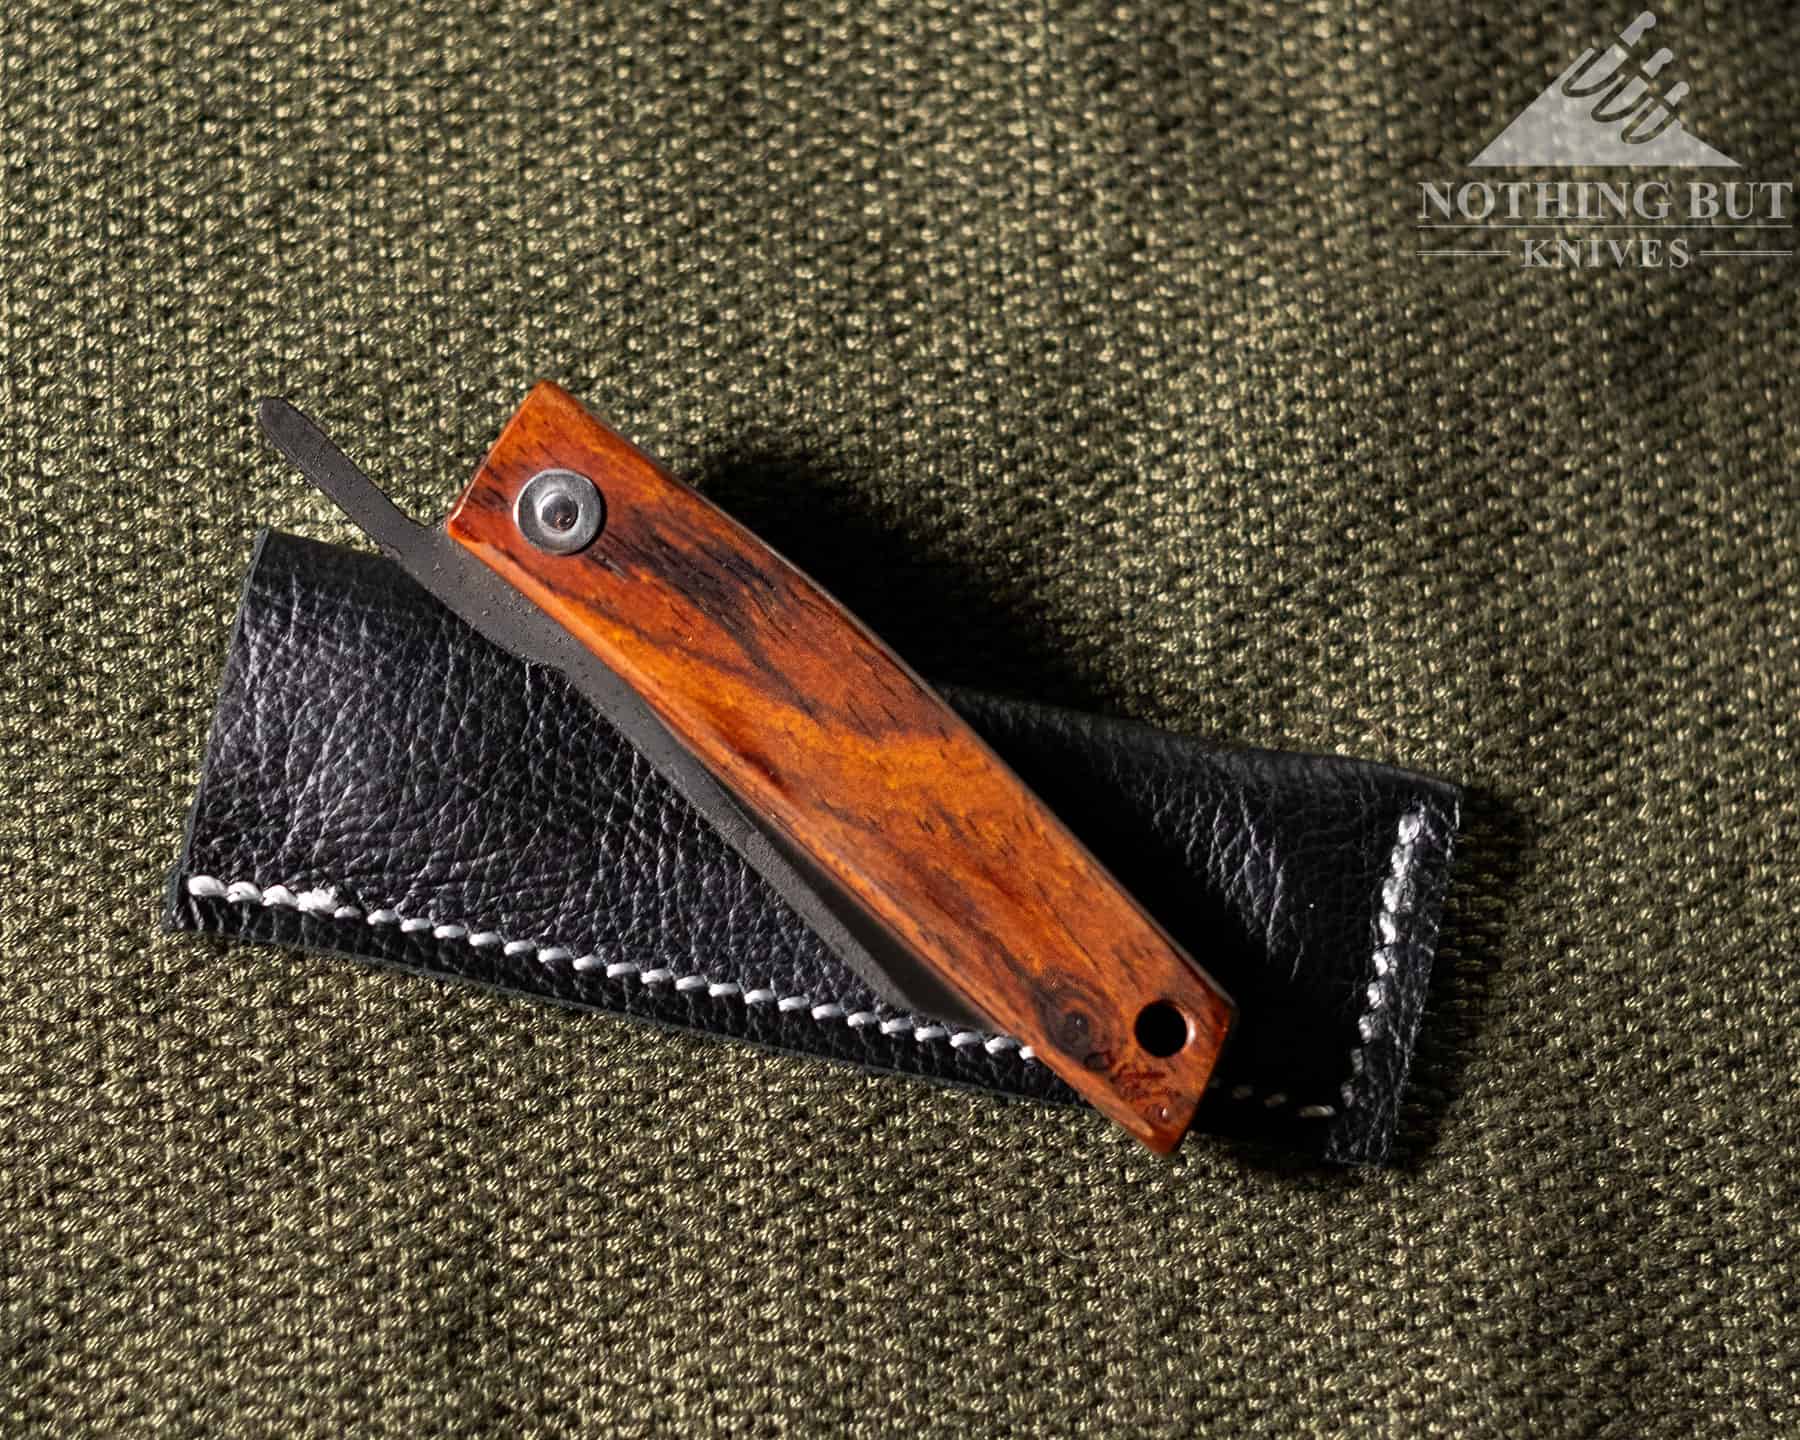 The Ohta FK5 is a fun friction folder that ships with a leather pocket pouch. 